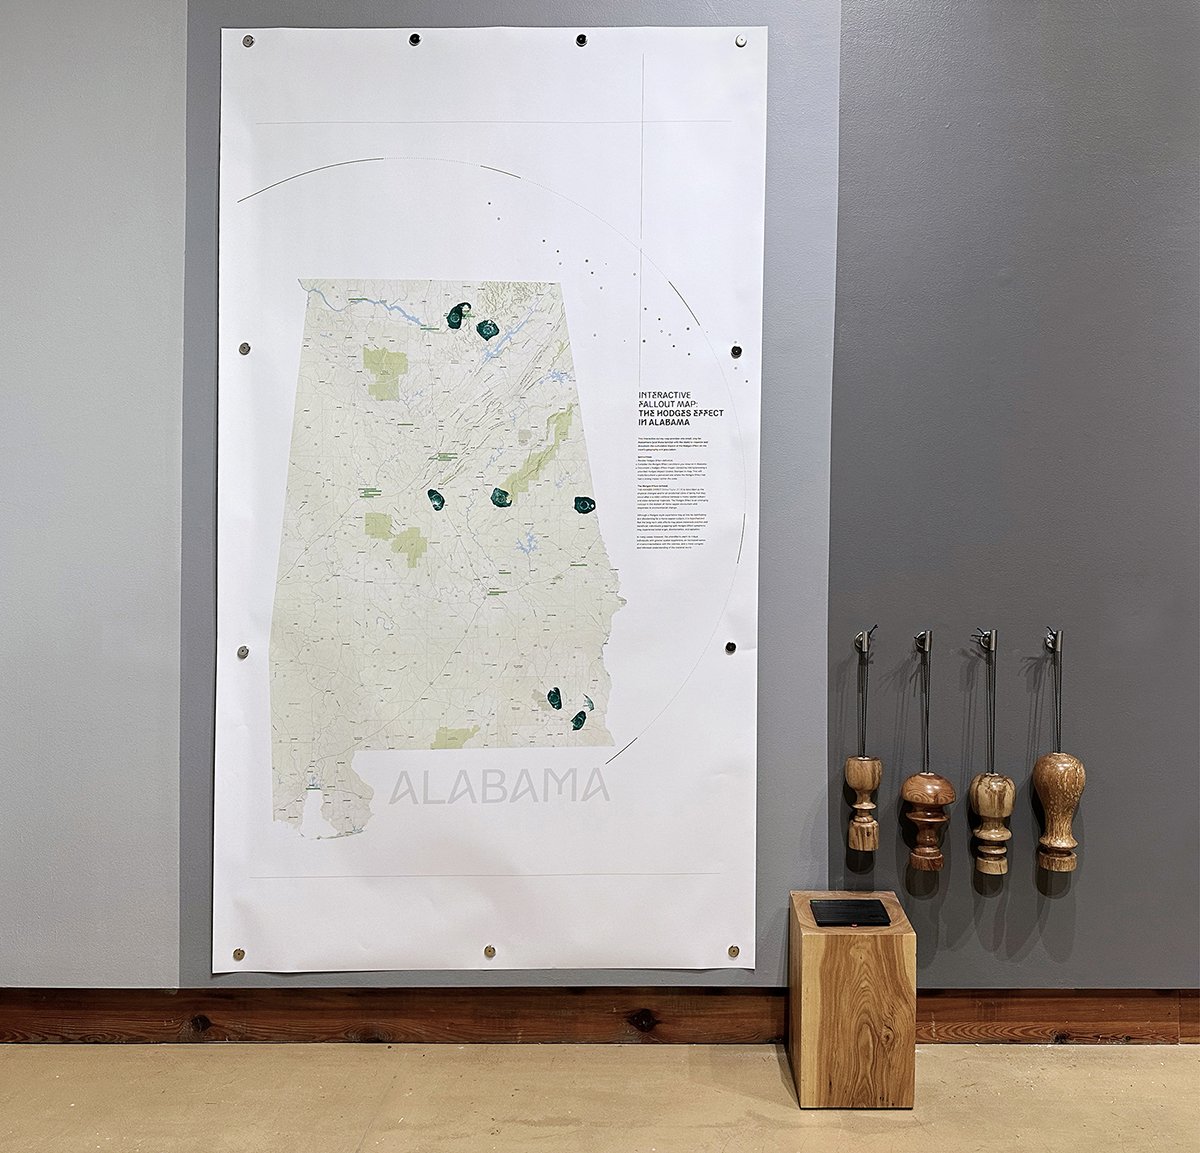 Interactive Fallout Map and Wood Handle Hodges Impact Zone Rubberstamps